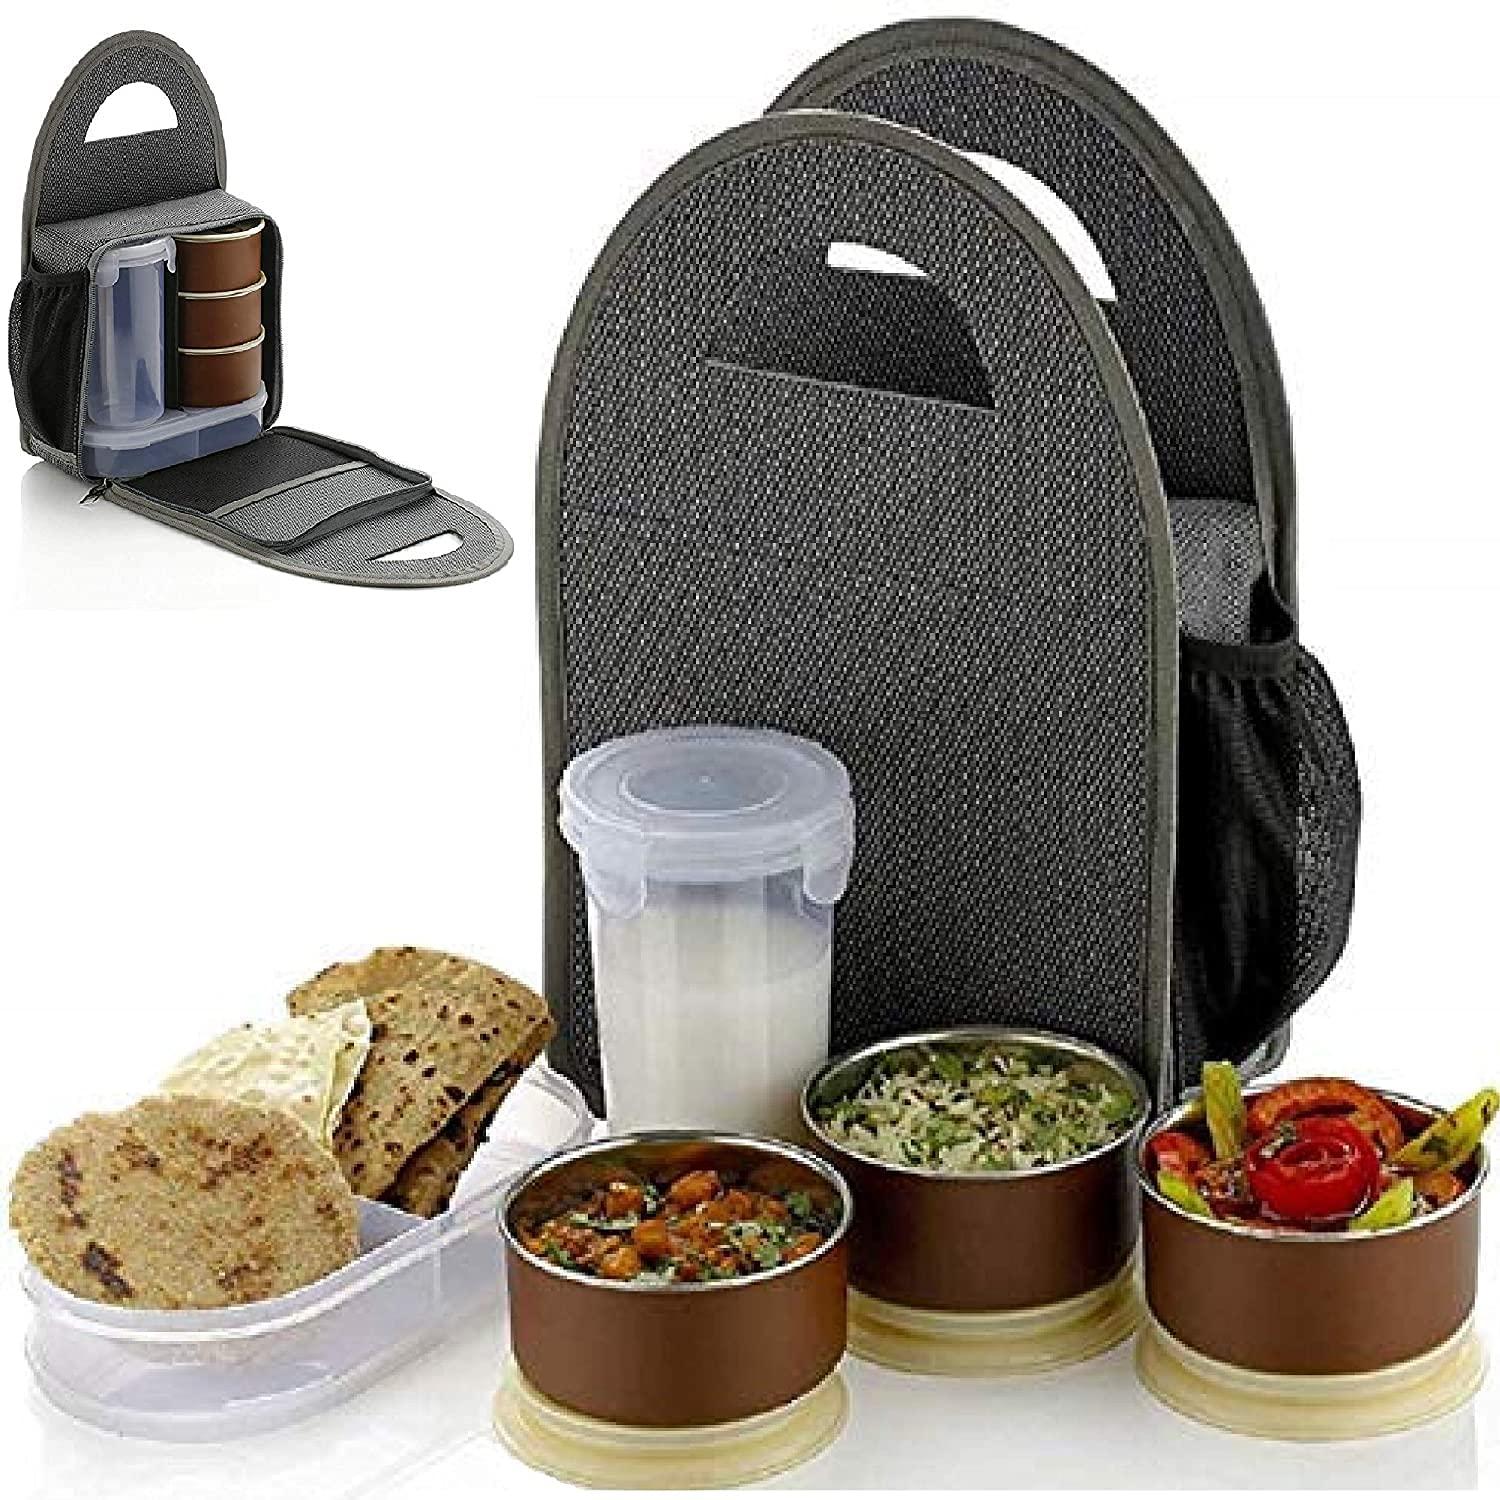 Stainless Steel 3 Container, 1 Casserole Set, 1 Plastic Bottle With Bag Microwave-Safe Lunch Box